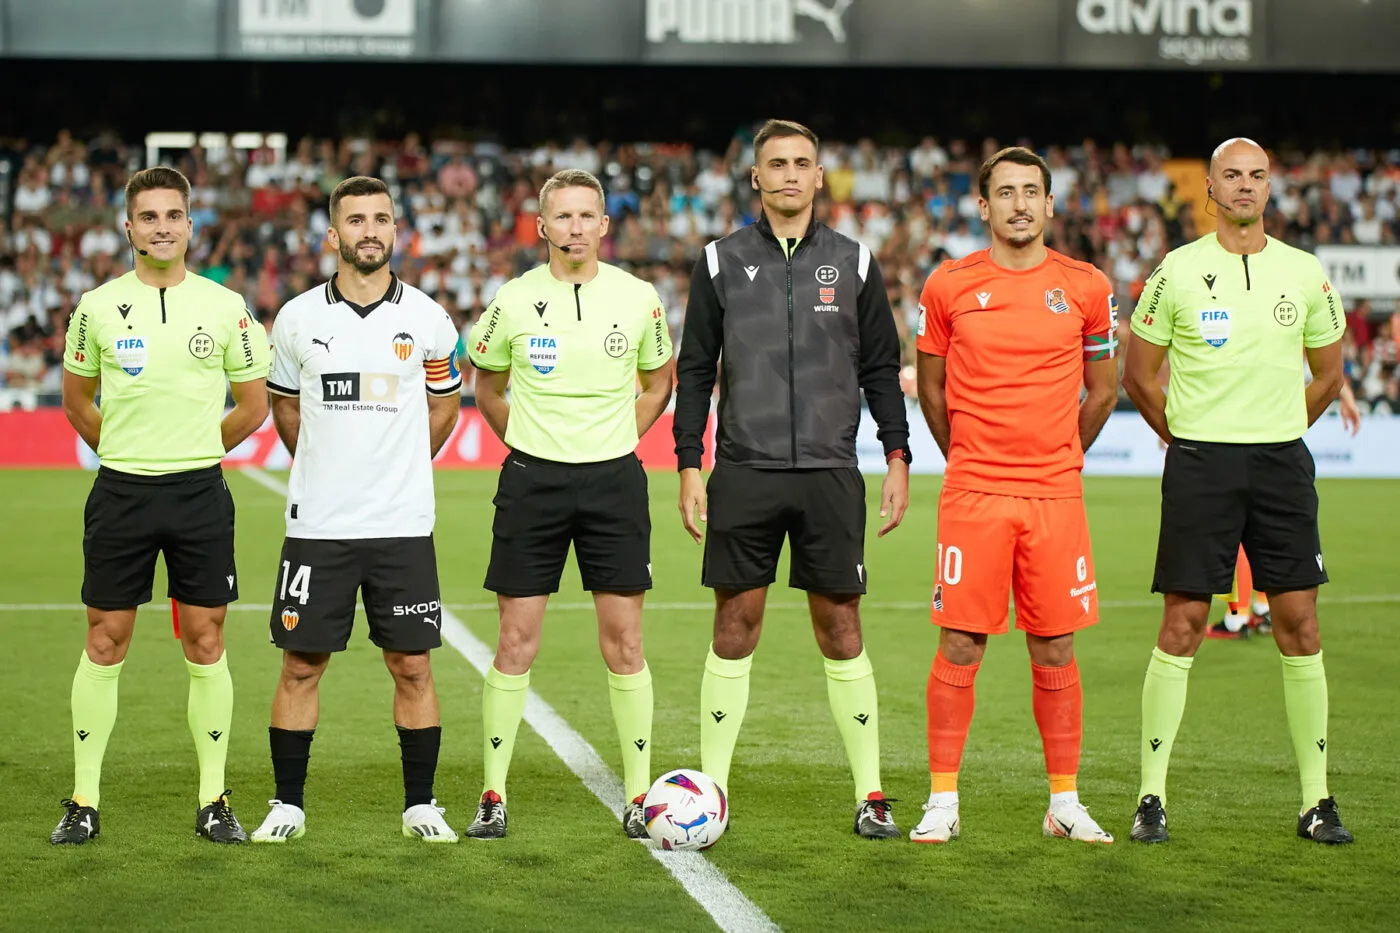 Jose Luis Gaya of Valencia CF and Mikel Oyarzabal of Real Sociedad before the kick off during the La Liga match between Valencia CF and Real Sociedad played at Mestalla Stadium on September 27 in Valencia Spain. (Photo by Jose Torres / Pressinphoto / Icon Sport) - Photo by Icon sport